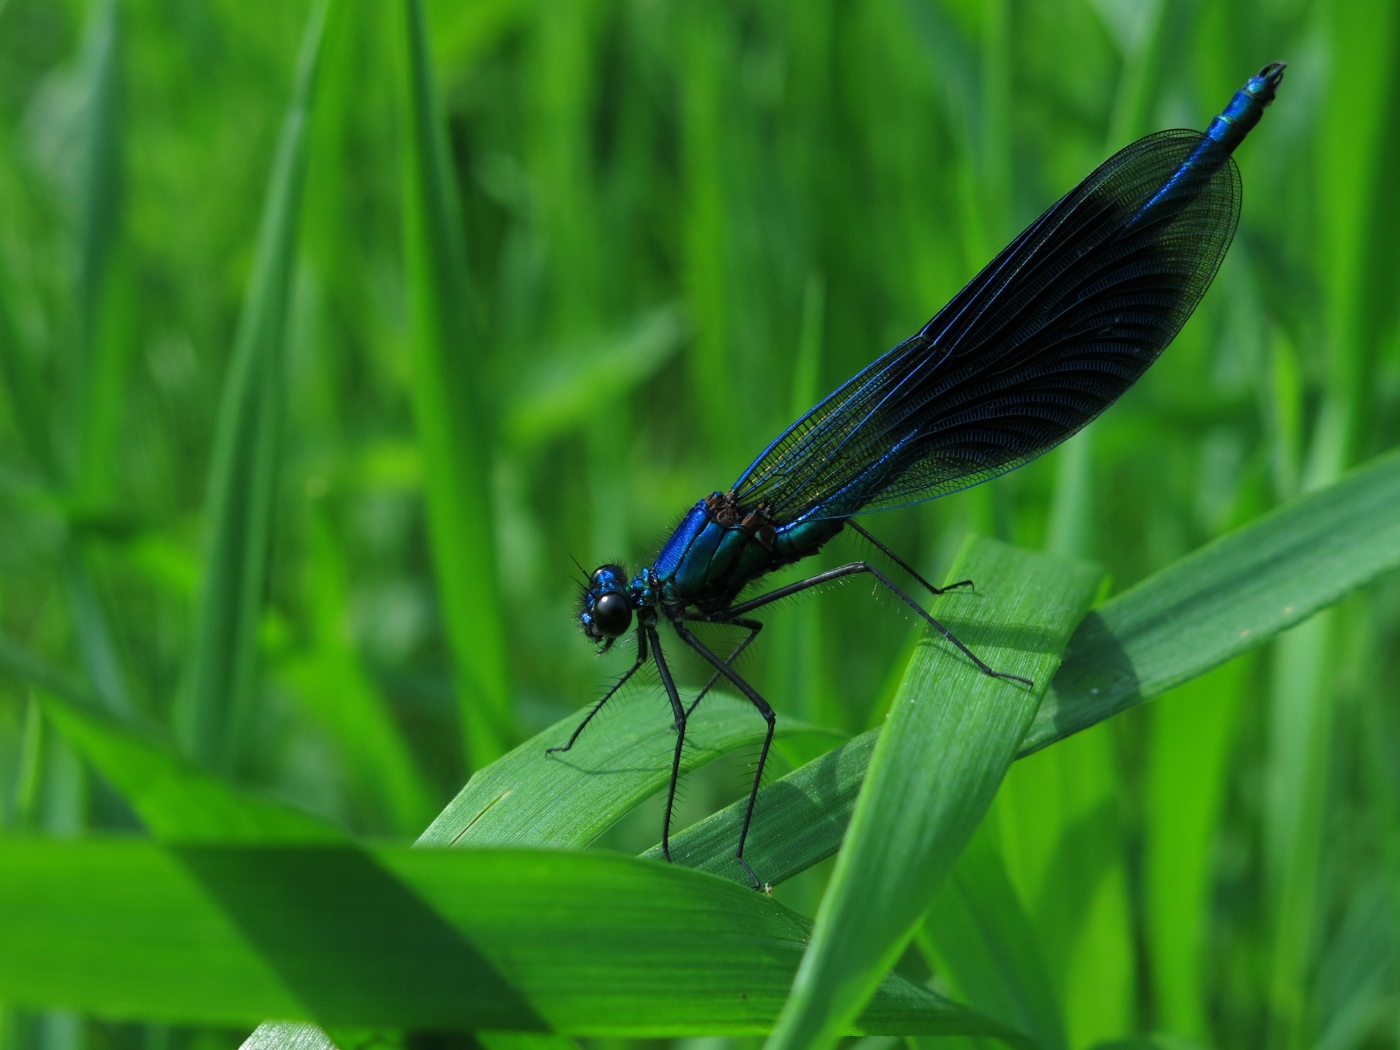 Black dragonfly sits on the green grass.